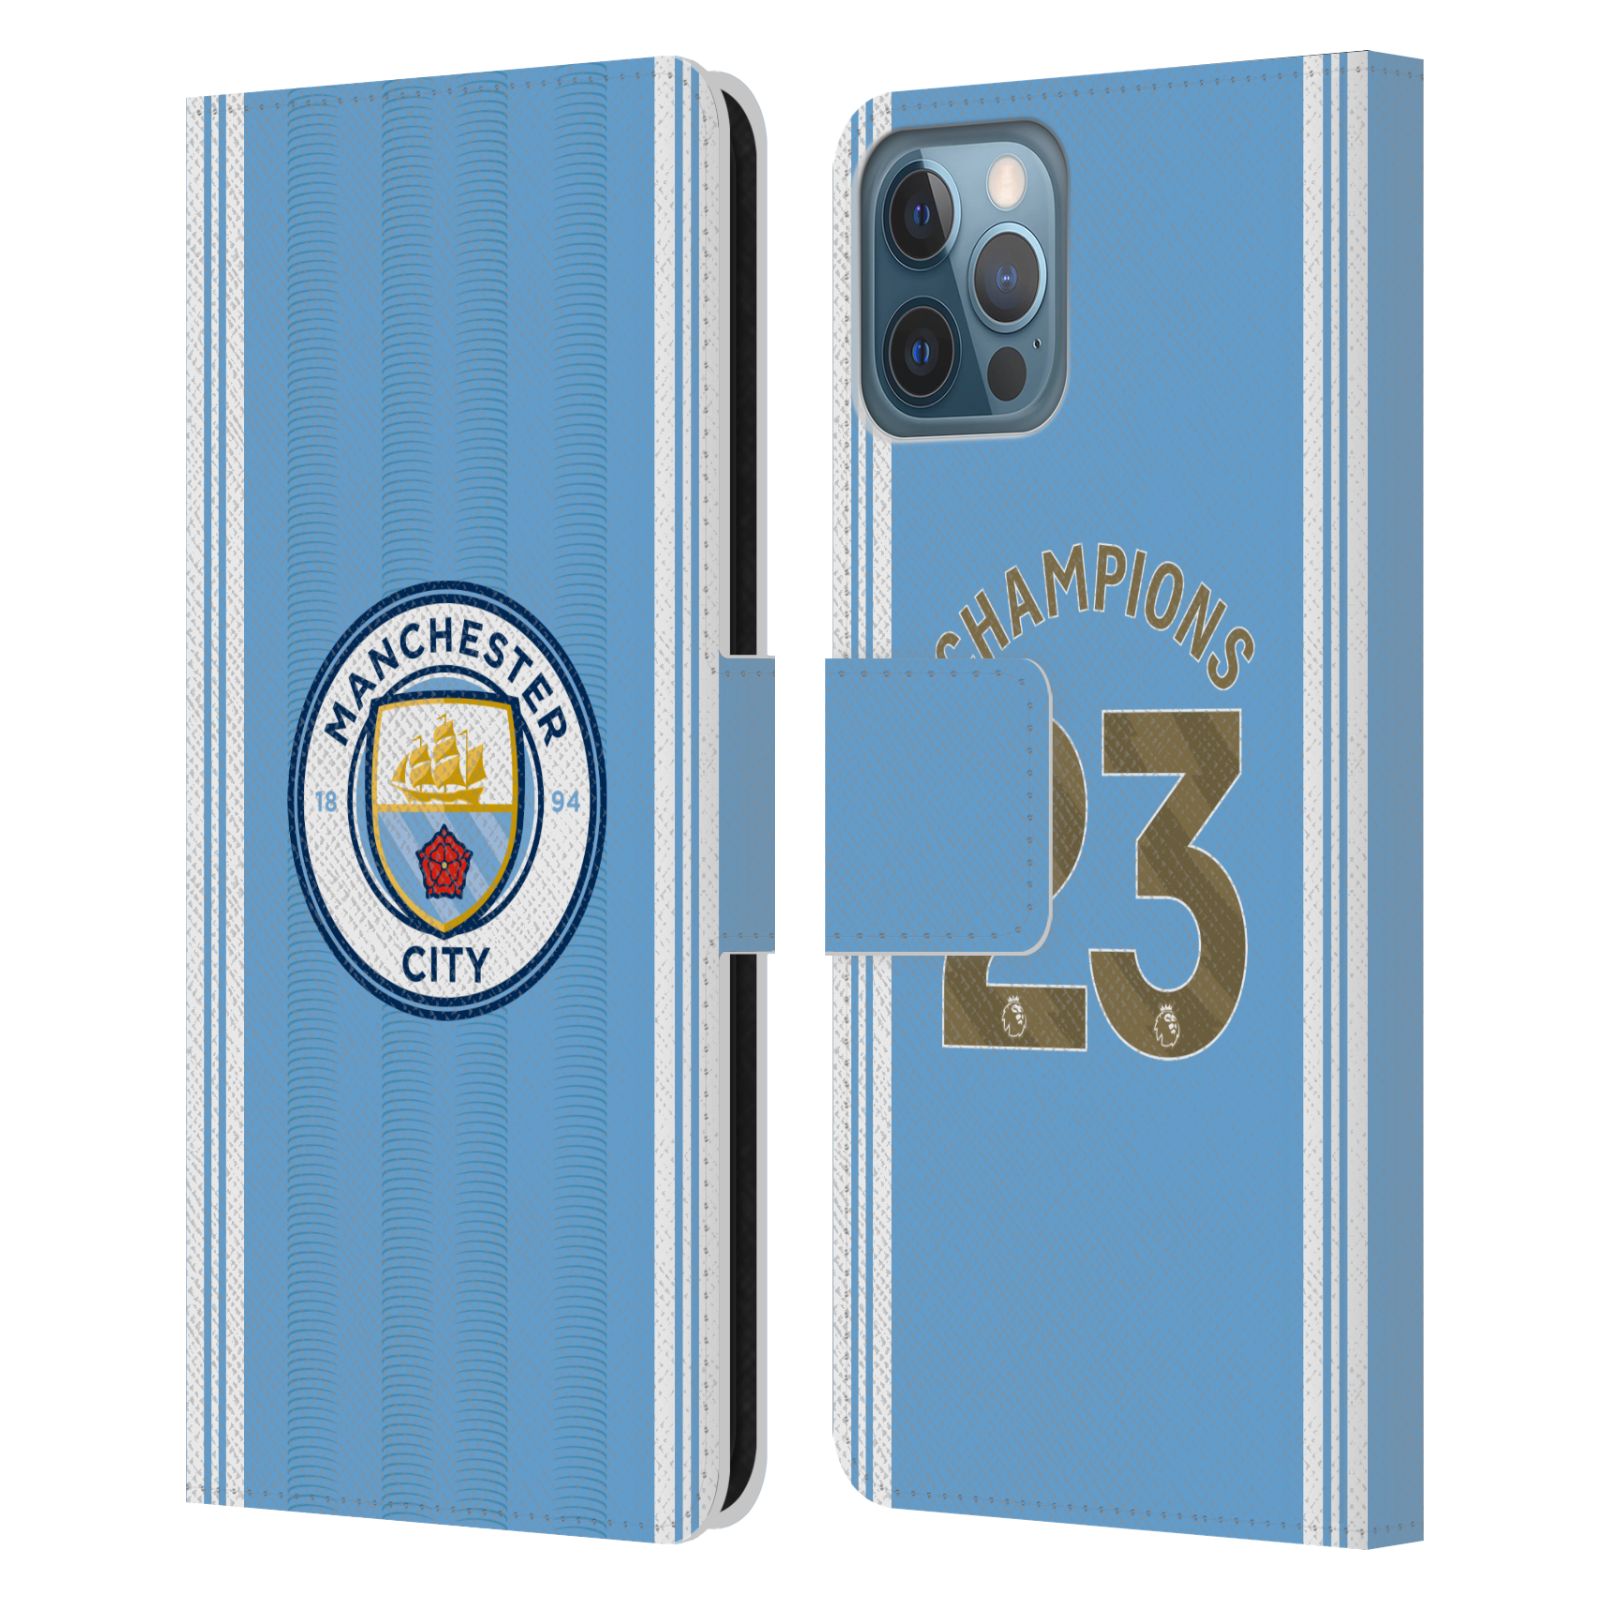 Pouzdro na mobil Apple Iphone 12 / 12 Pro - HEAD CASE - Manchester City - Champions dres 2